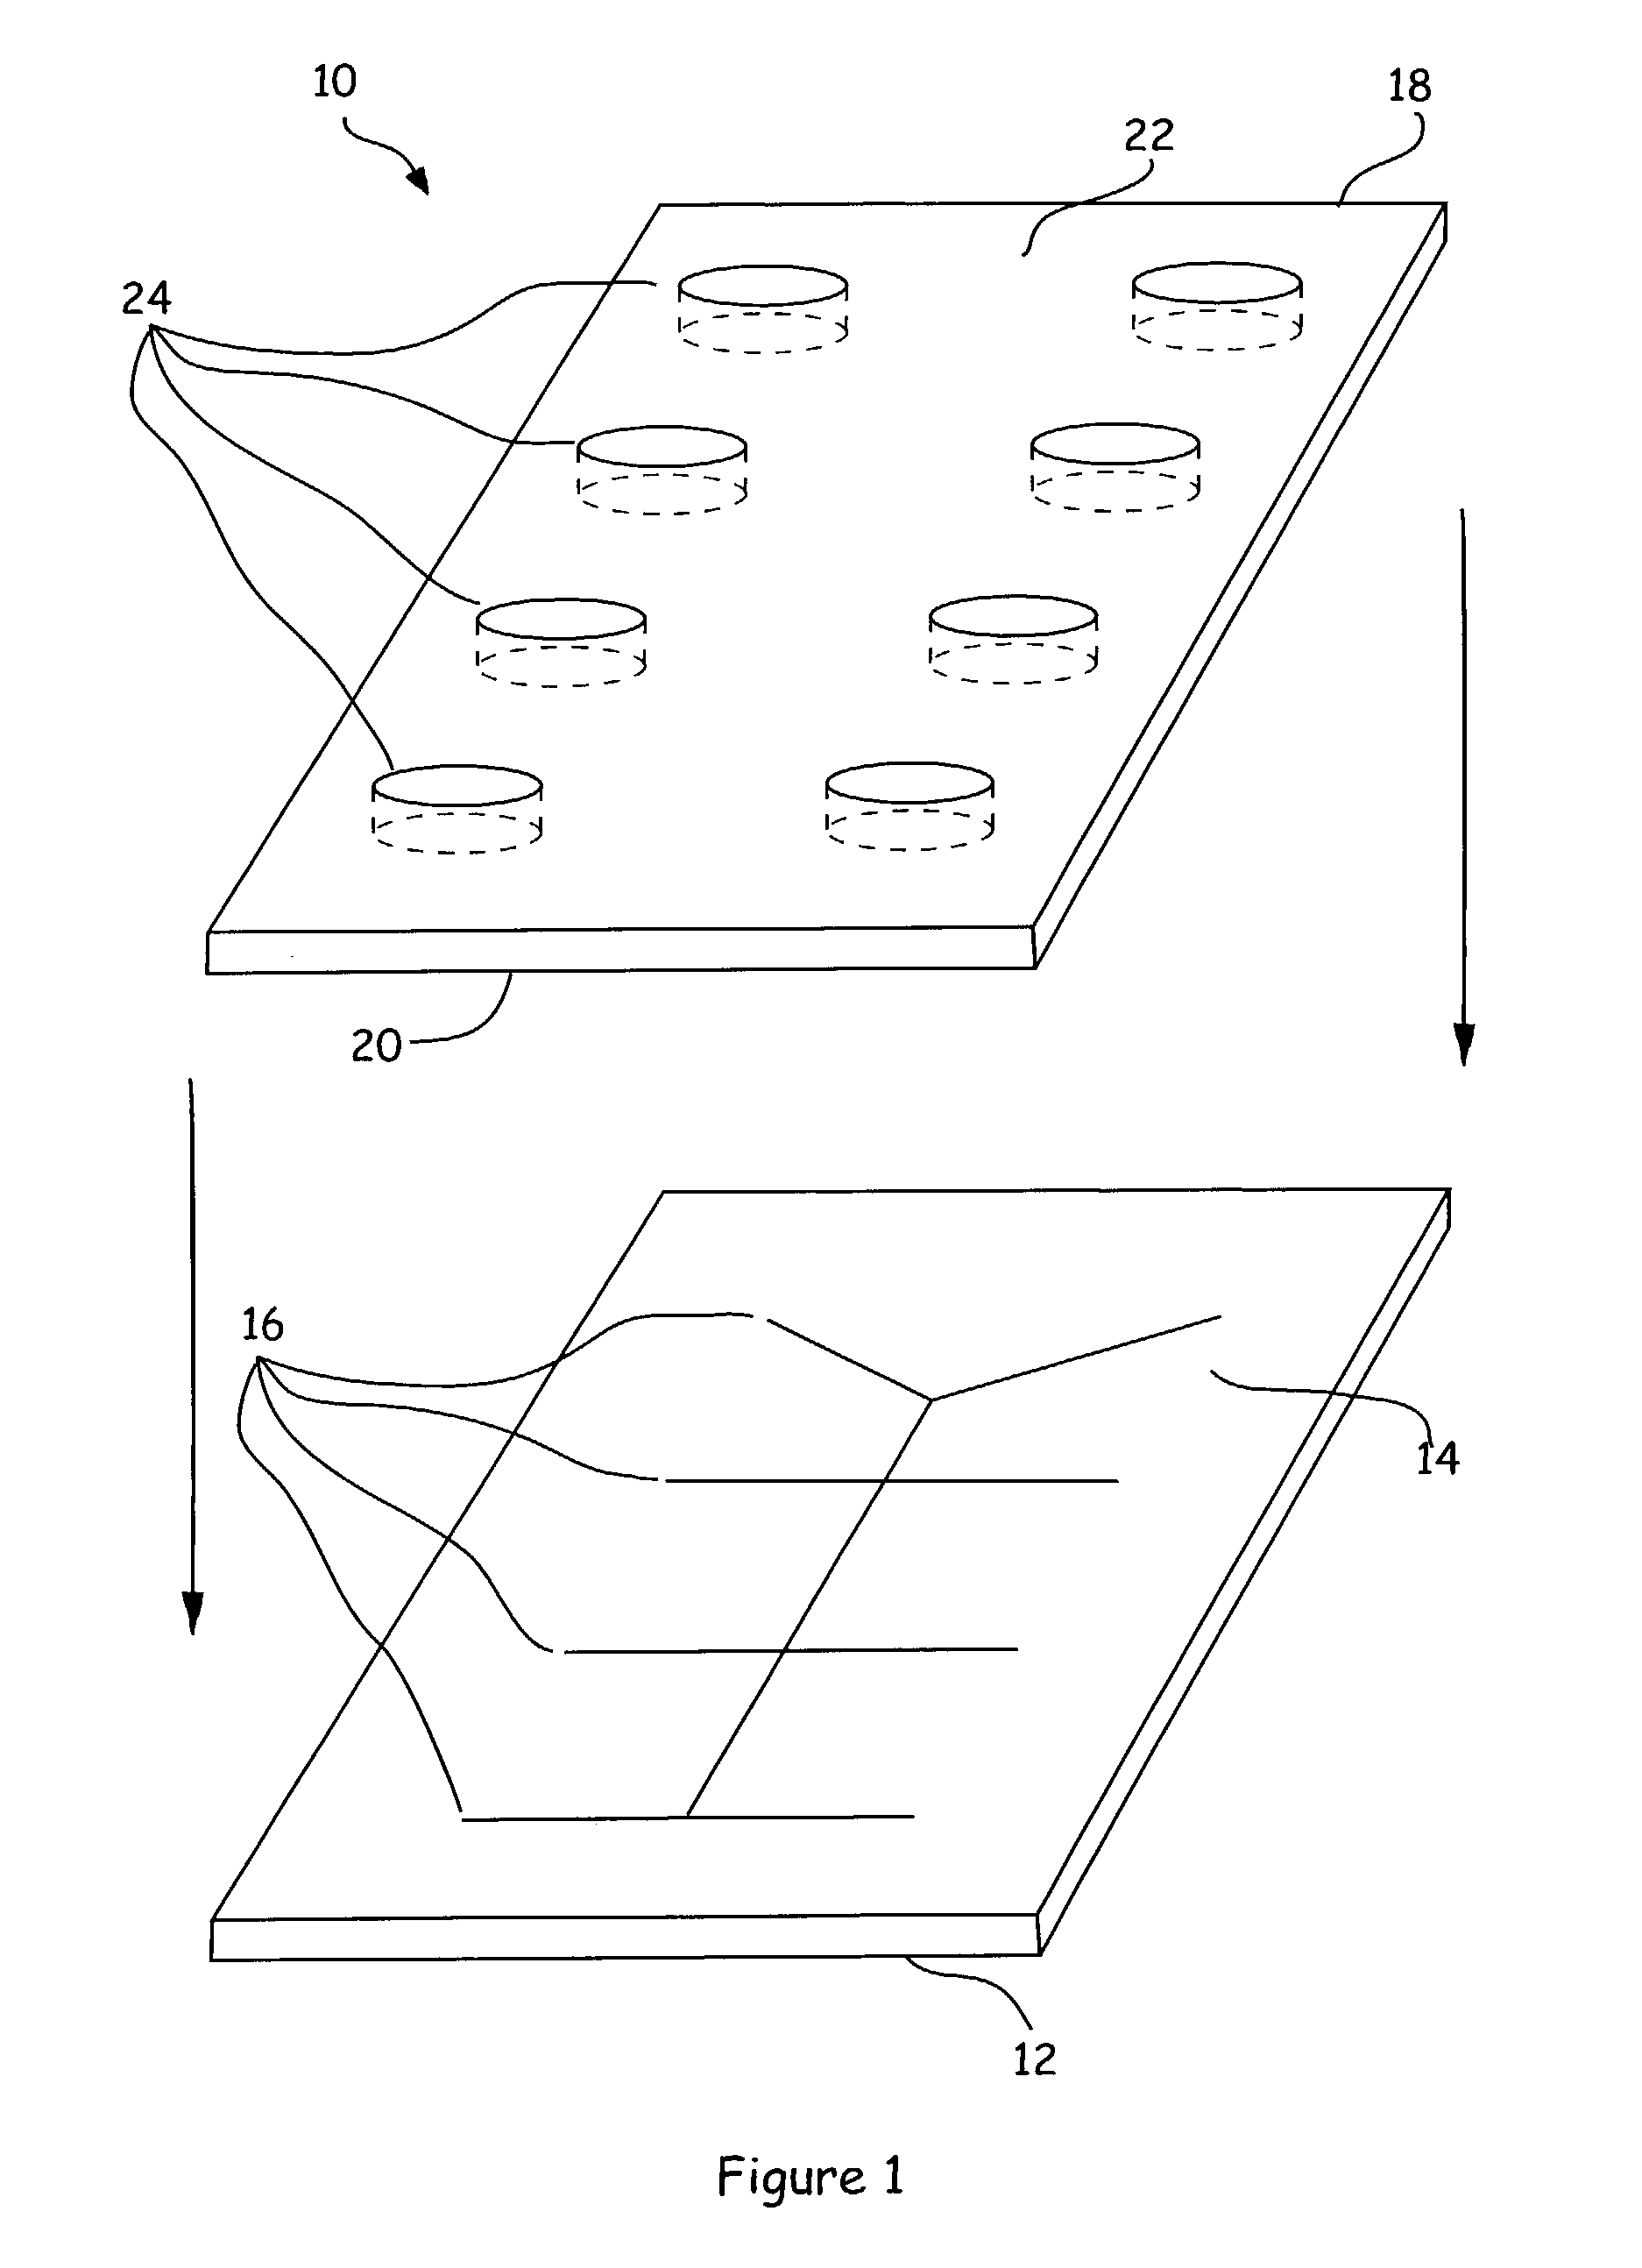 Methods of fabricating polymeric structures incorporating microscale fluidic elements